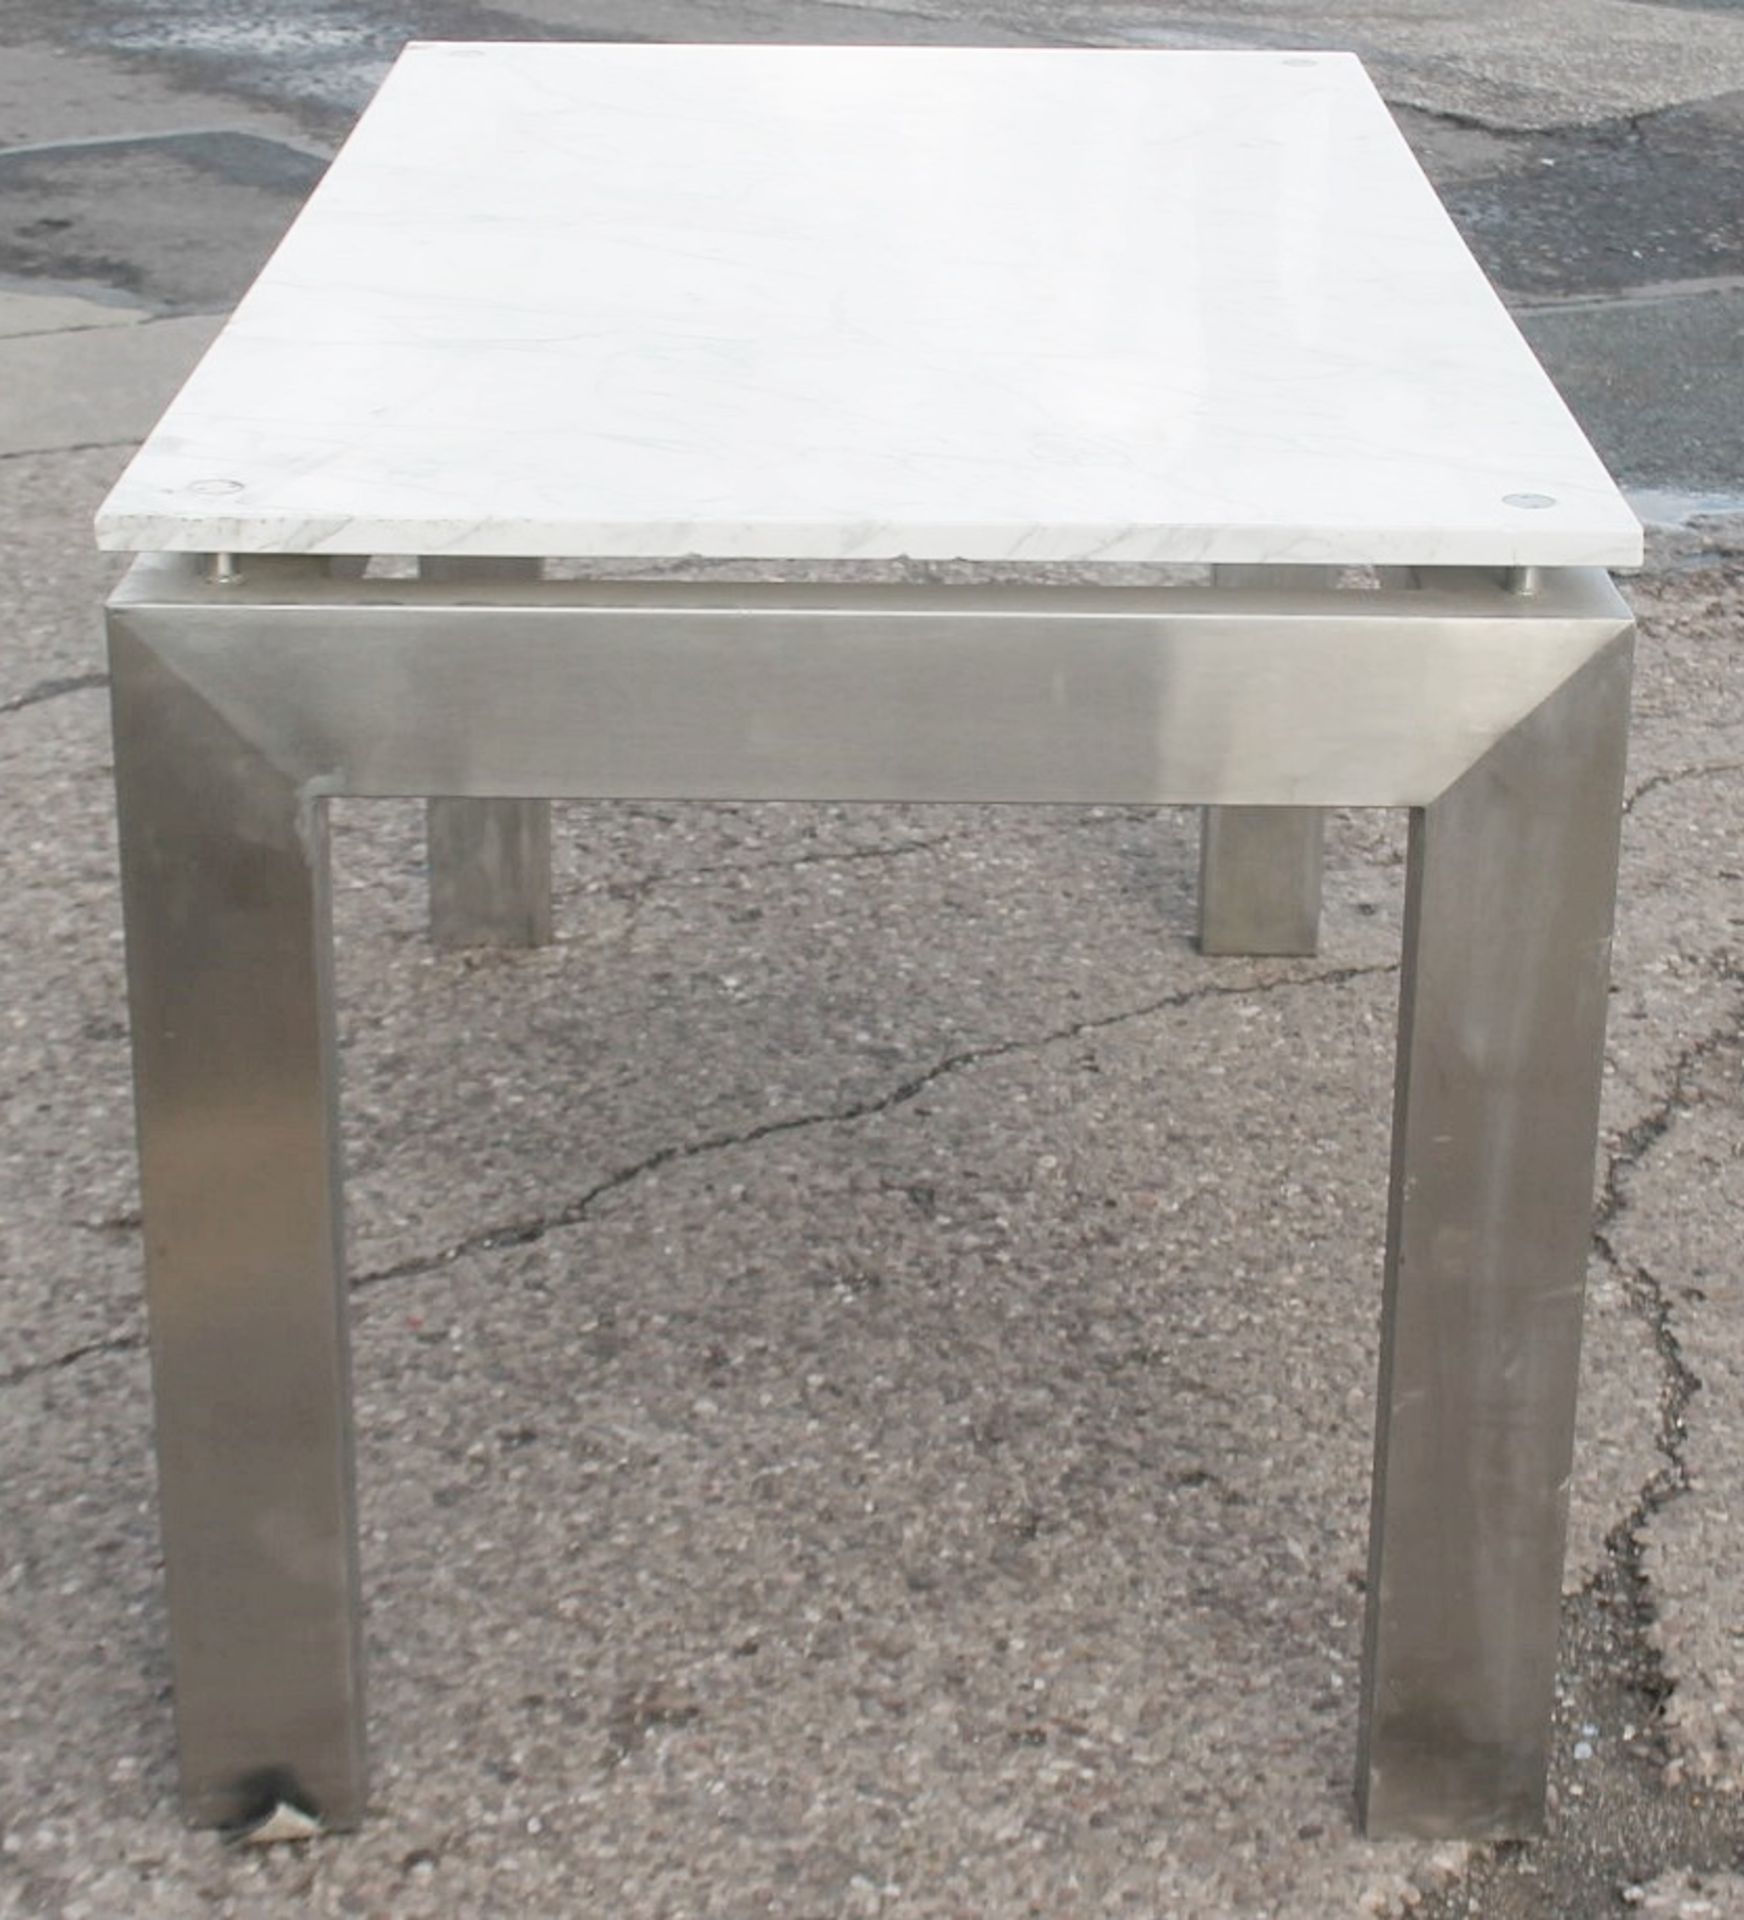 1 x Marble-Topped, Steel Framed Retail Display Table - Recently Removed From A World-renowned London - Image 2 of 3